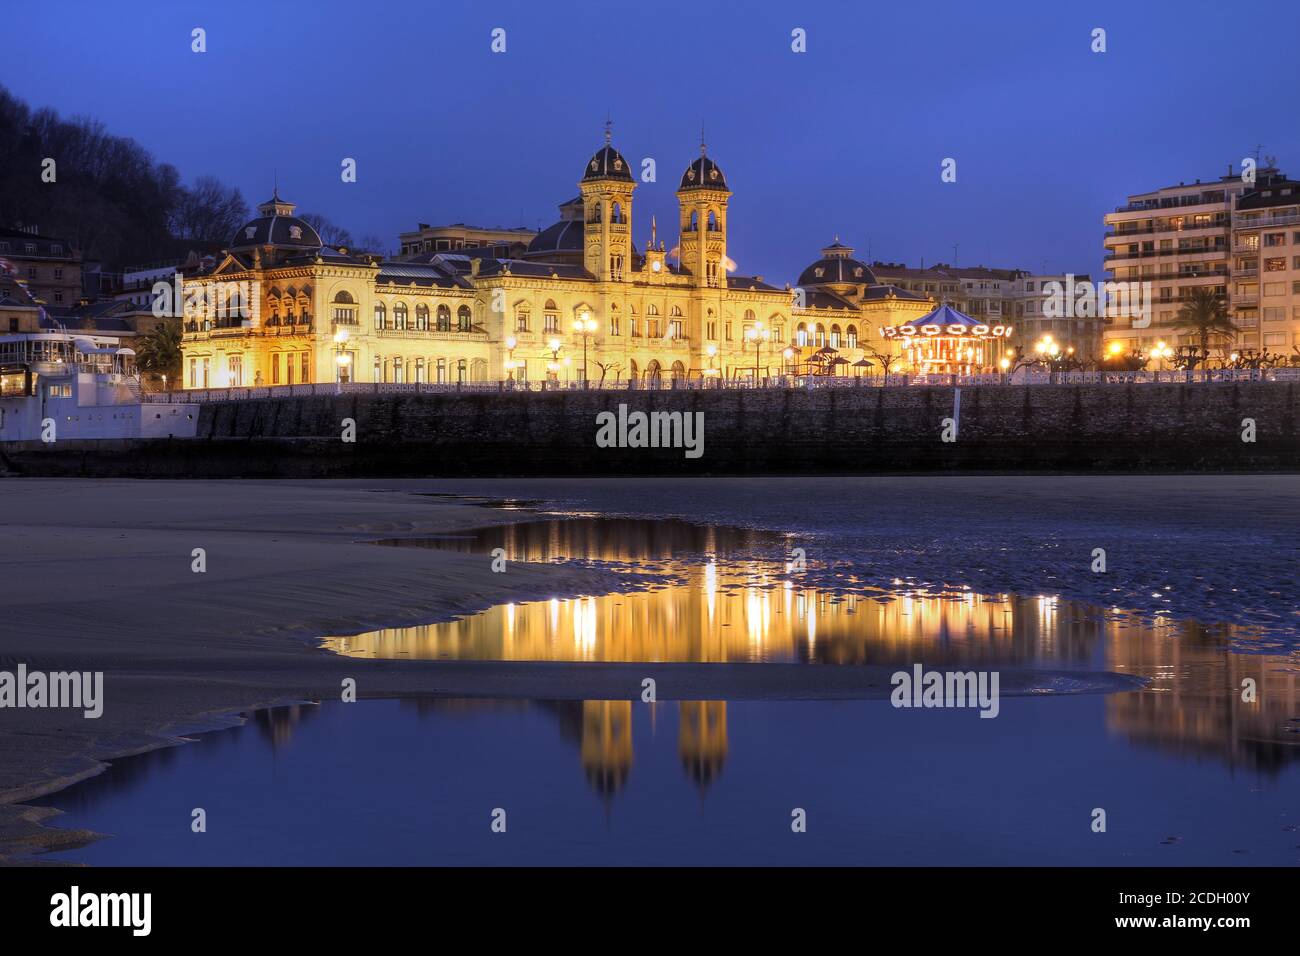 Night scene witht the City Hall of San Sebastian (Donostia in Basque country language) in Spain taken from the city's famous beaches. The retreat of t Stock Photo